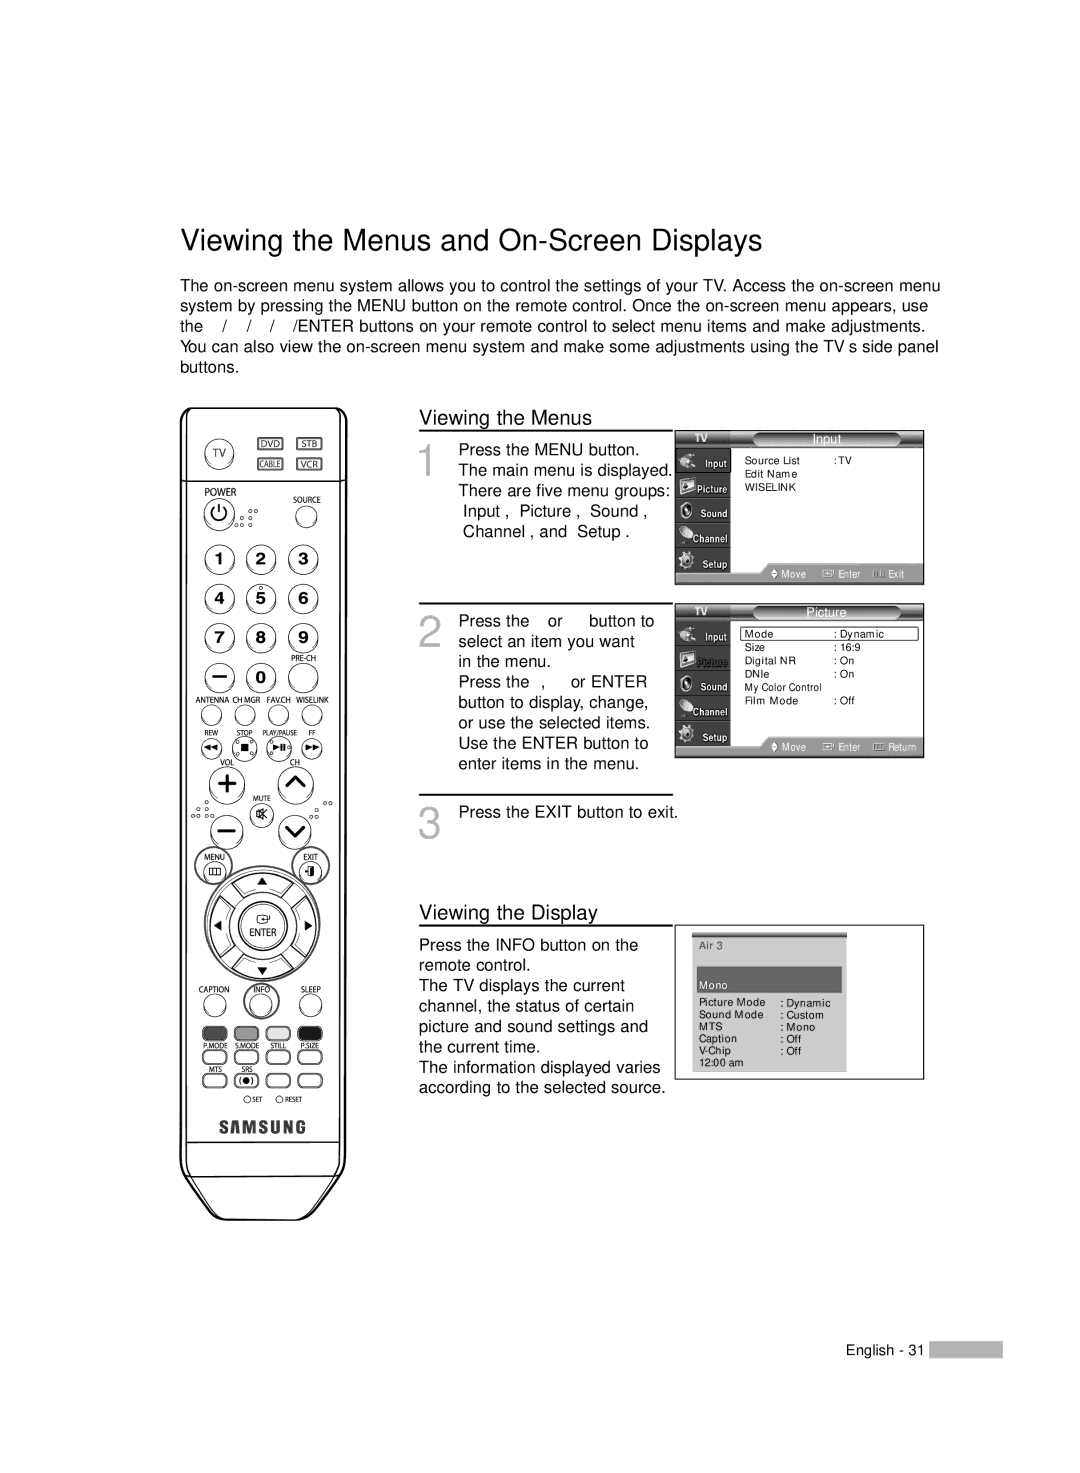 Samsung HL-S4676S manual Viewing the Menus and On-Screen Displays, Viewing the Display 